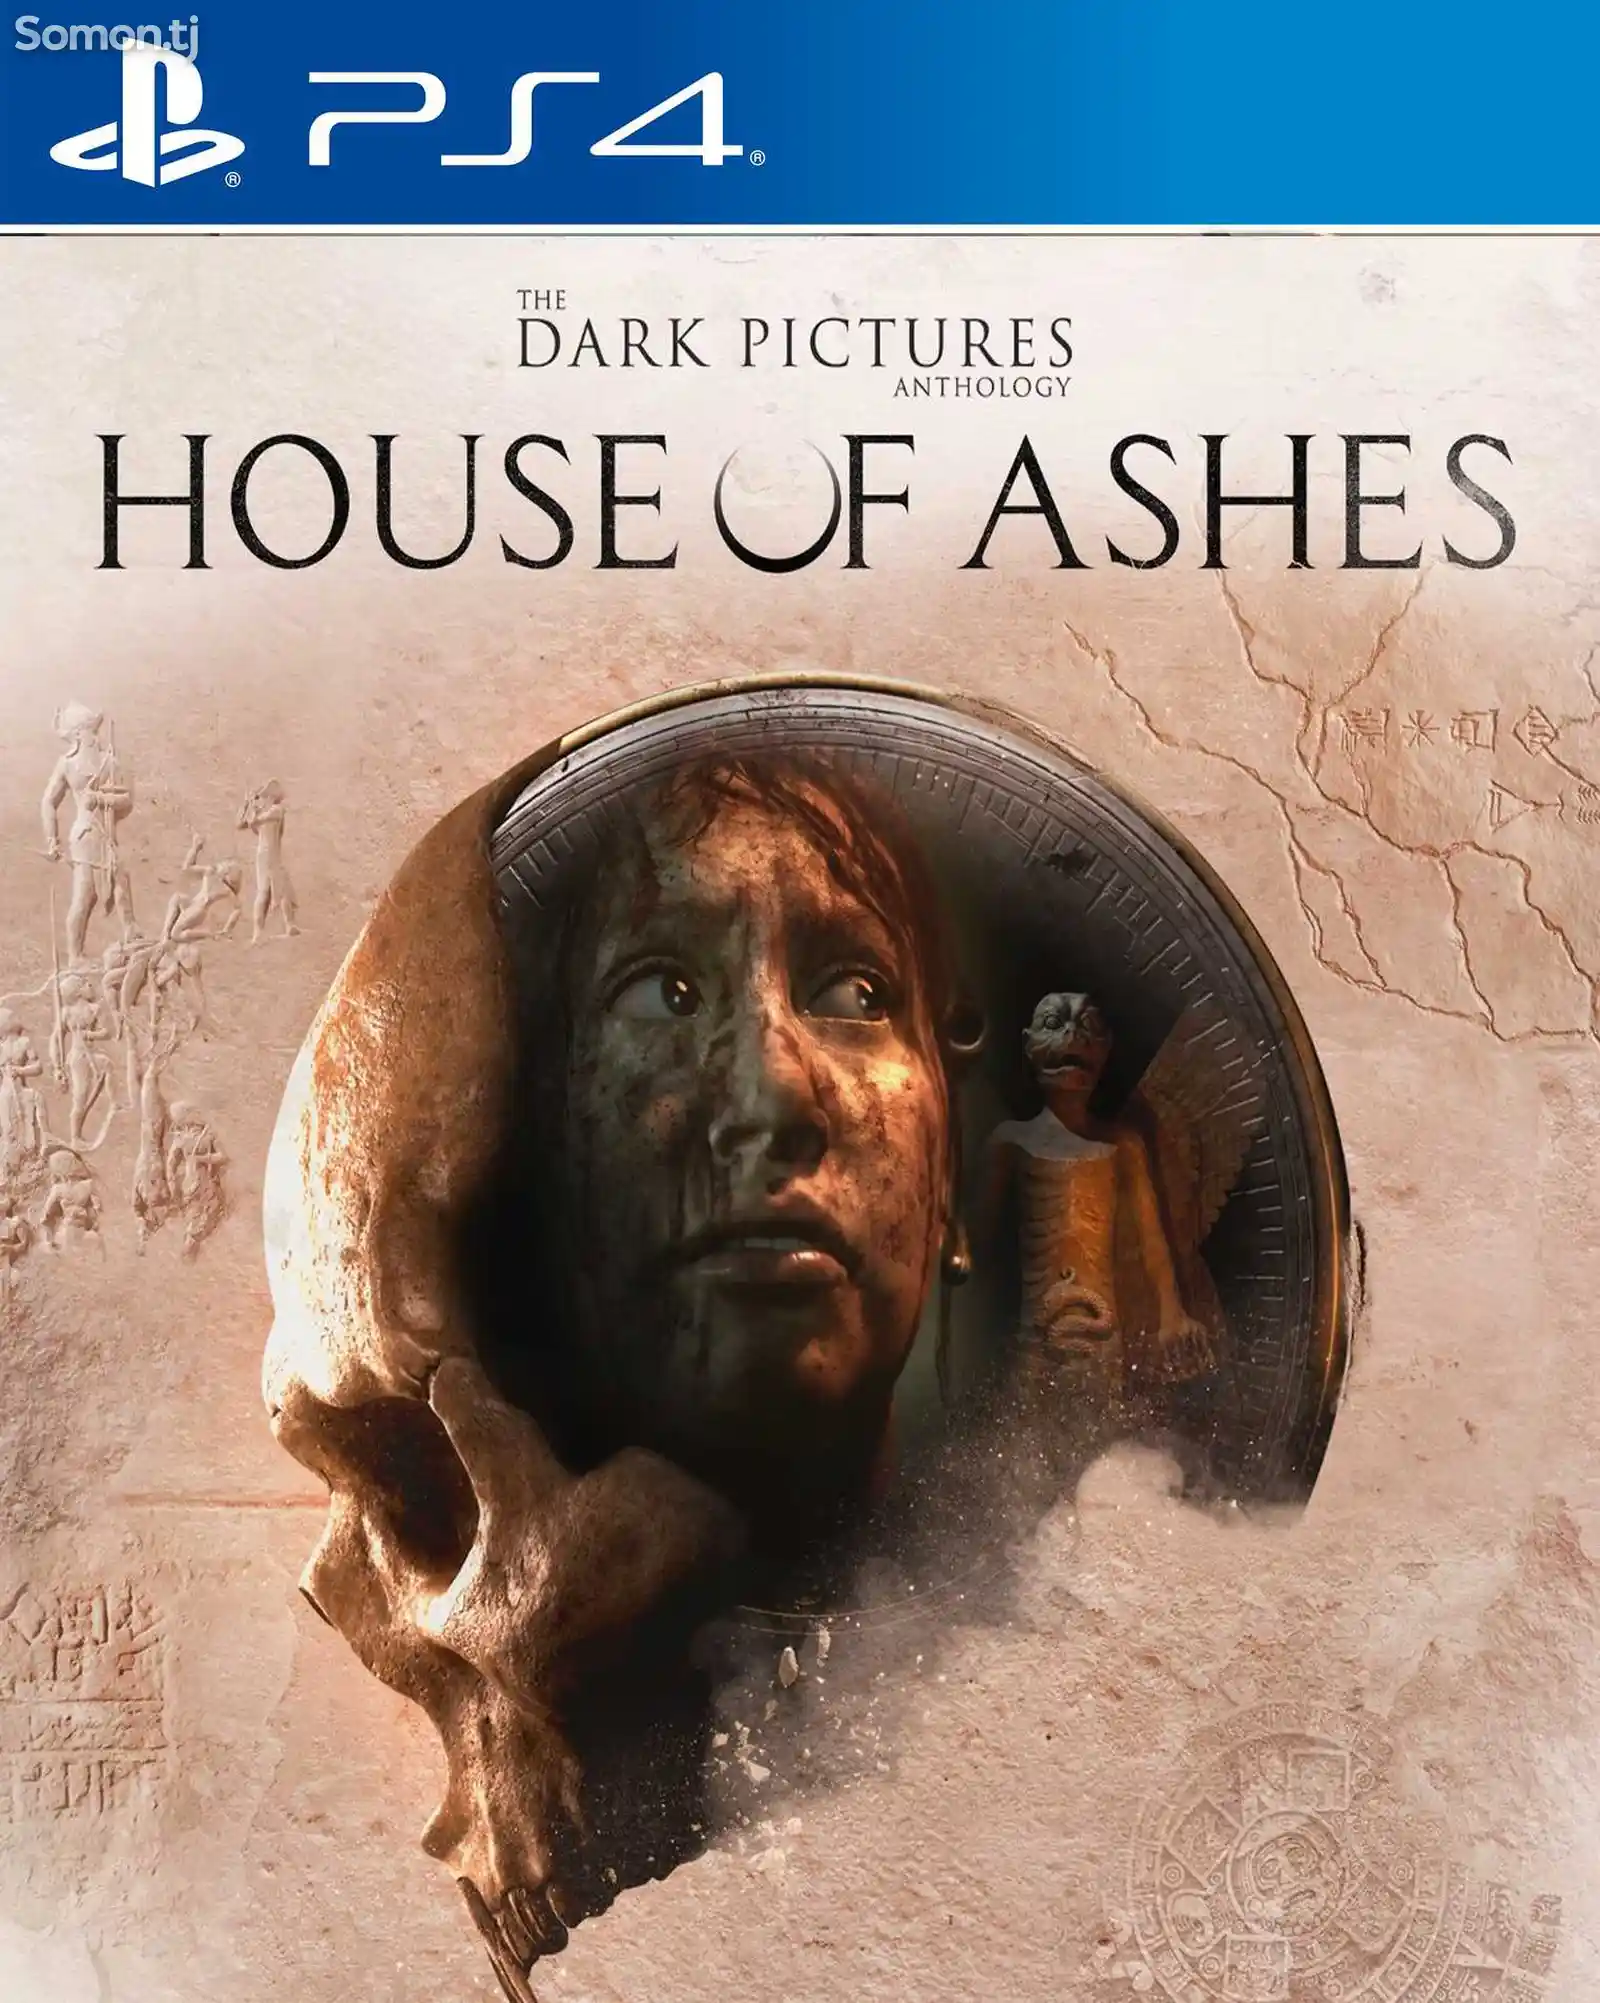 Игра The dark pictures anthology house of ashes для PS-4 / 5.05 / 6.72 / 9.00 /-1